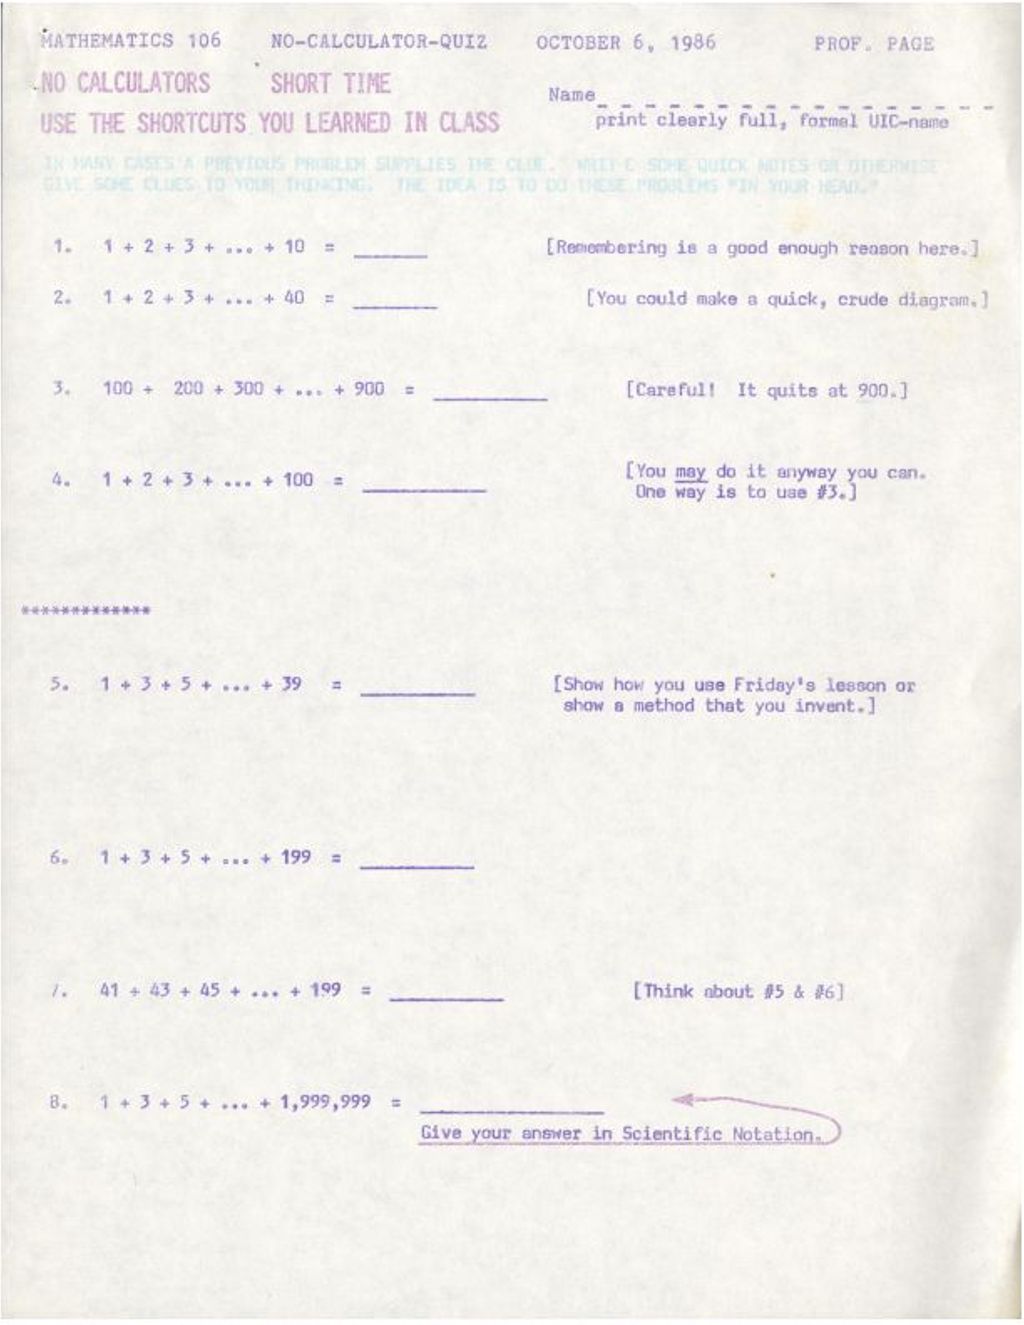 Math 106 No-Cal. Quiz 1986 “Use the shortcuts you learned” 1 + 2 + . . . .10